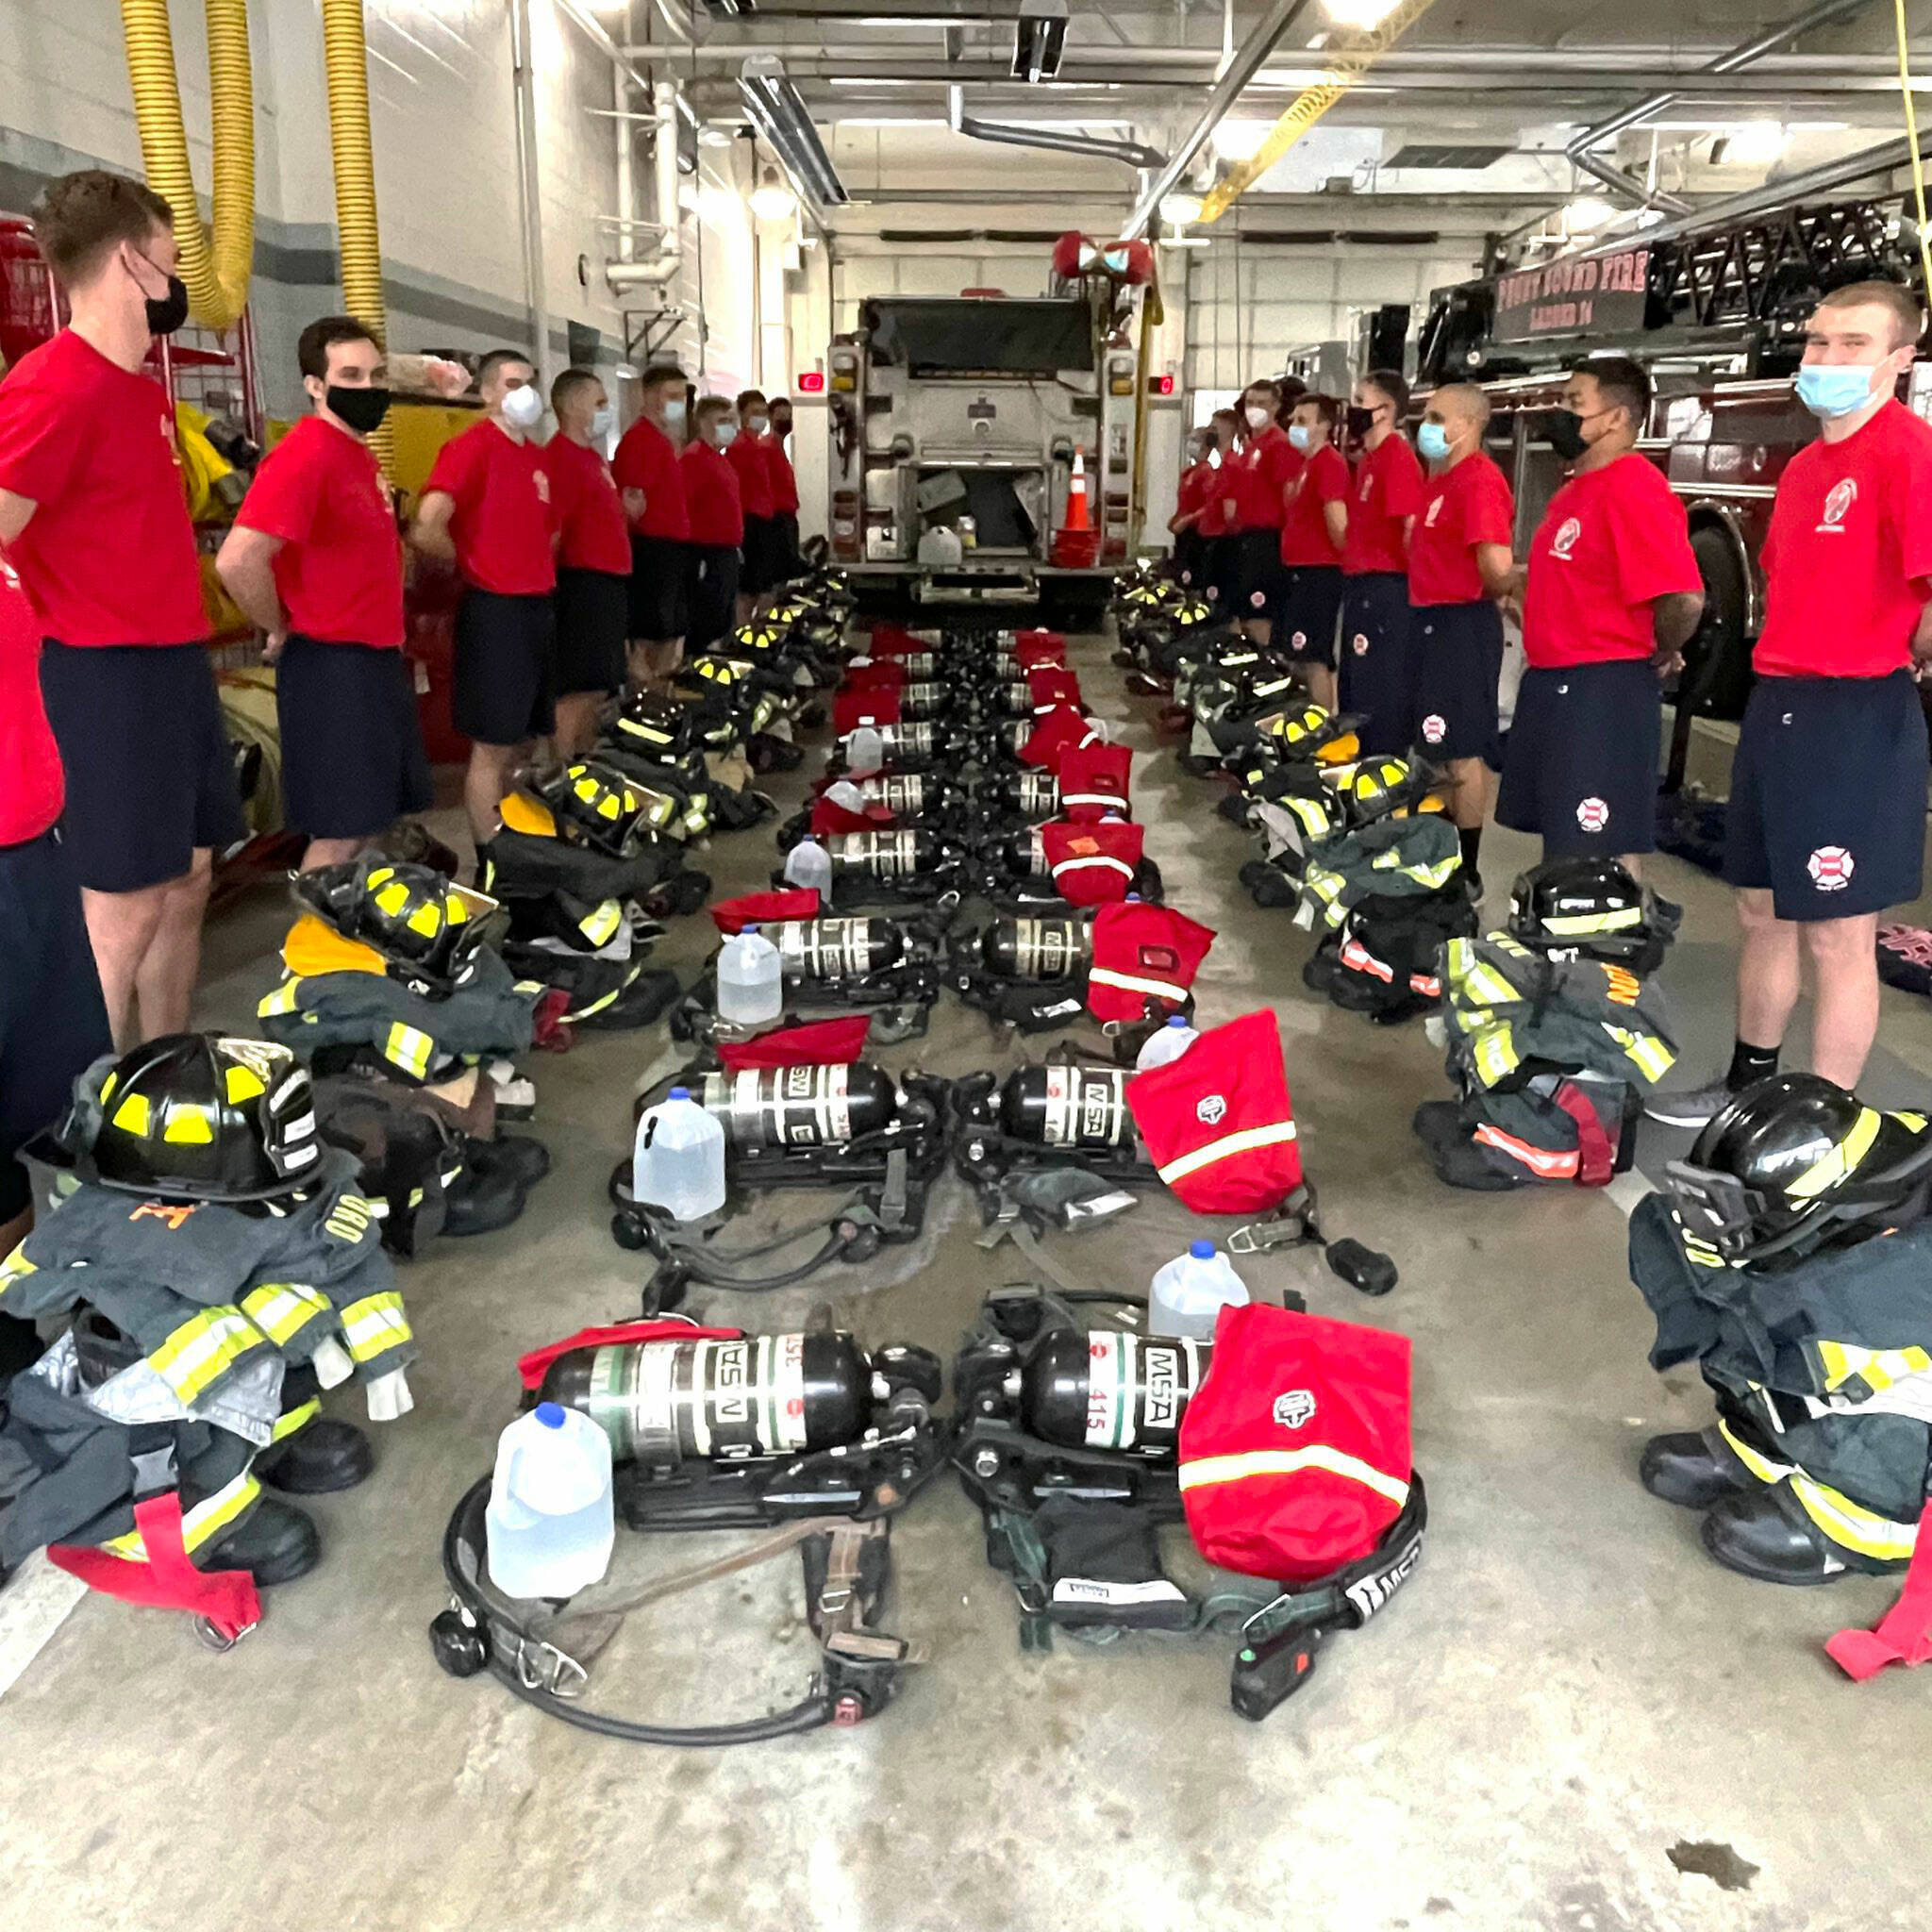 Kent-based Puget Sound Fire recruits become familiar with their gear during this Dec. 30 training. COURTESY PHOTO, Puget Sound Fire